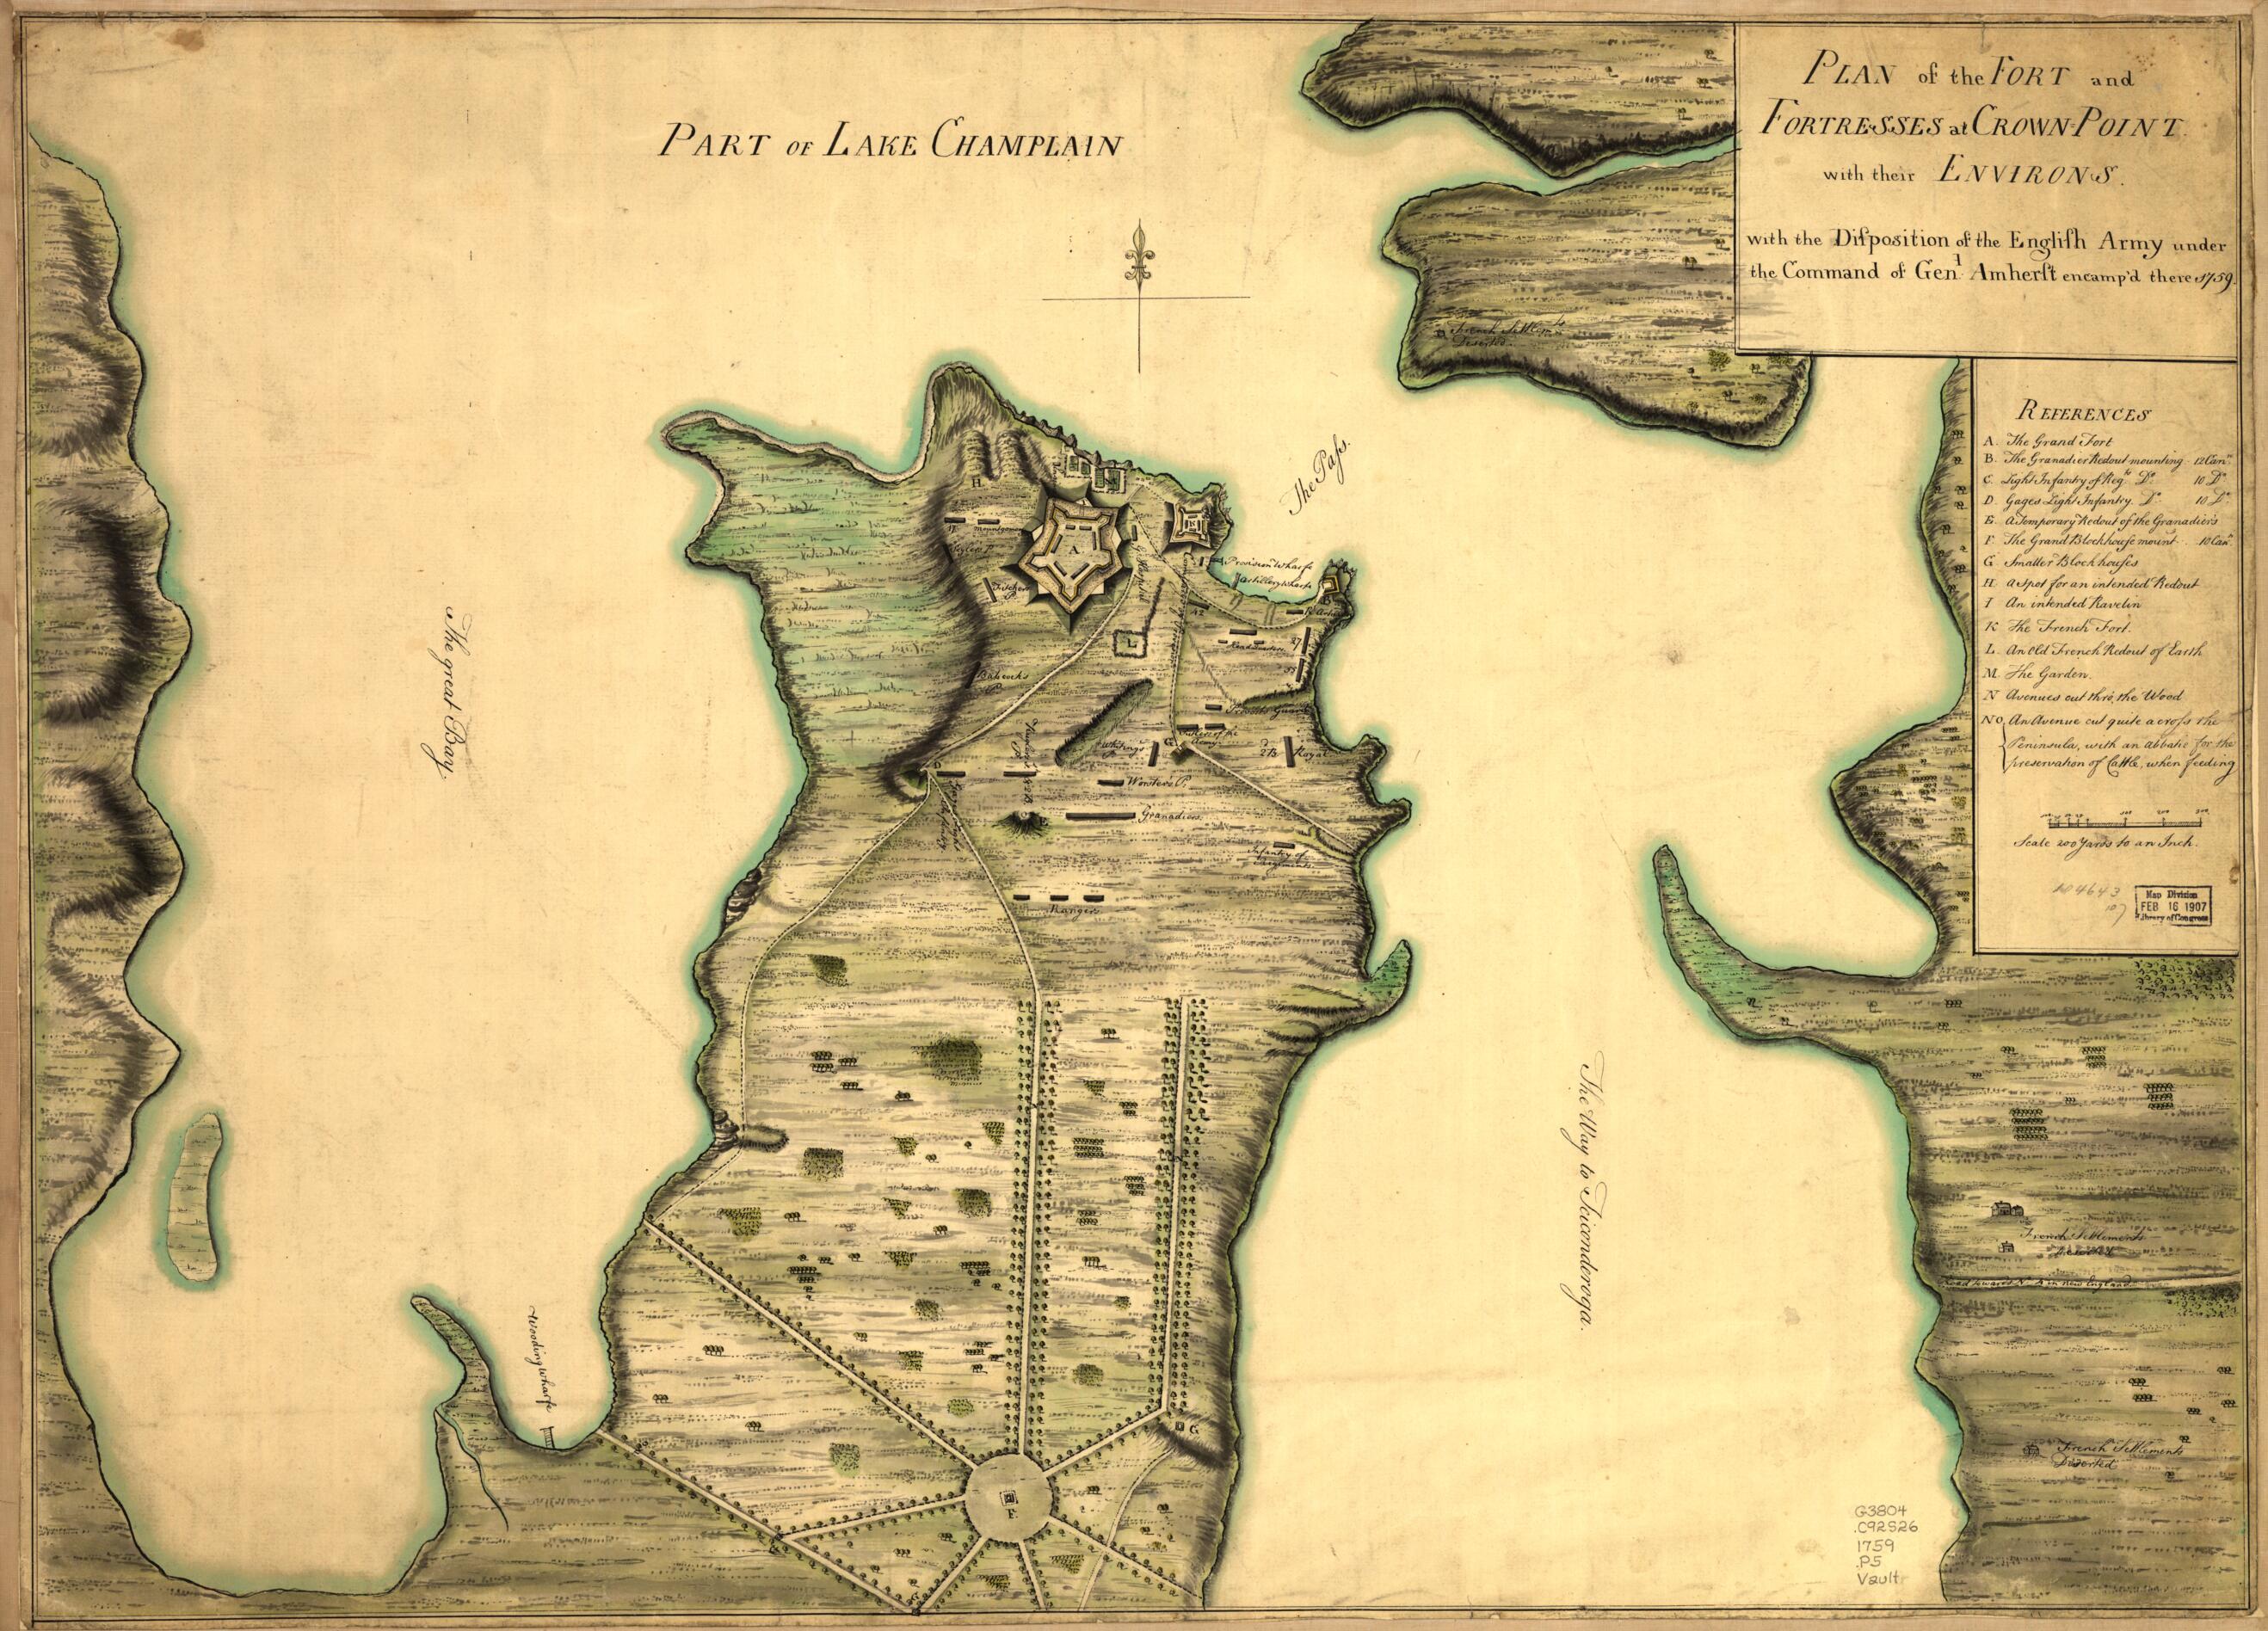 This old map of Plan of the Fort and Fortress at Crown Point With Their Environs. With the Disposition of the English Army Under the Command of Genl. Amherst Encamp&